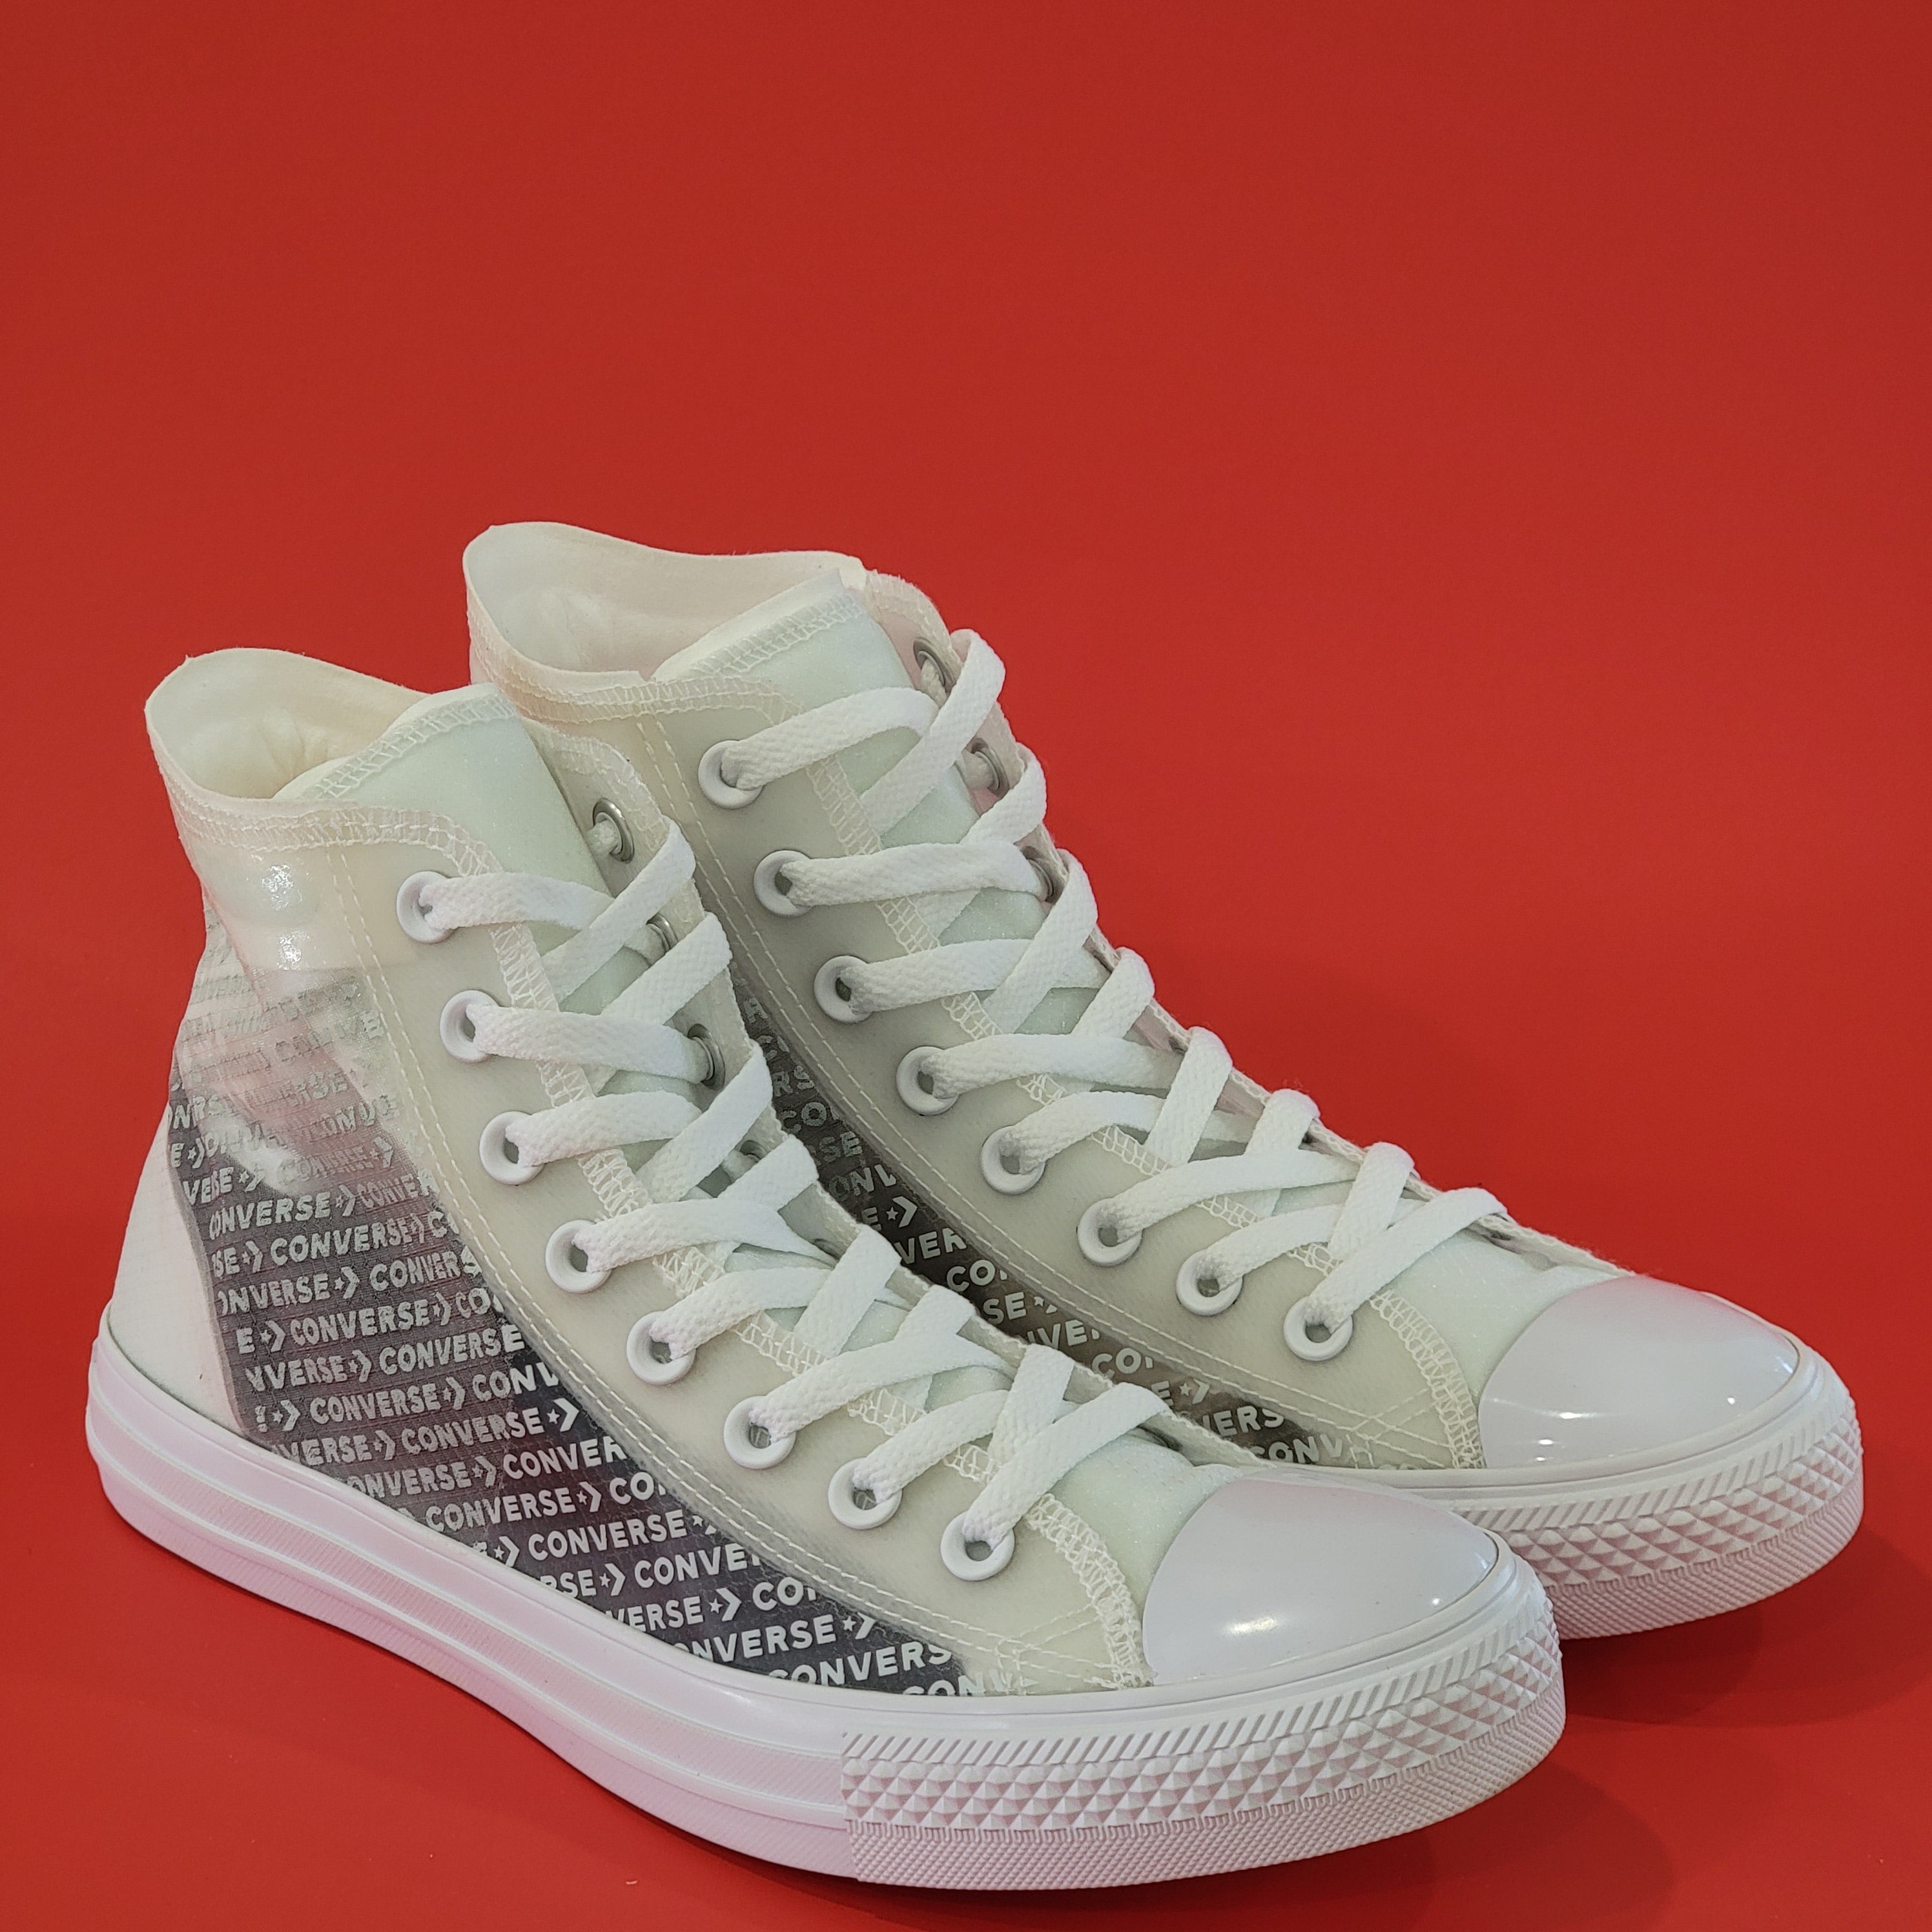 Converse CTAS High Top 'Translucent' Sneakers 165609C NWT